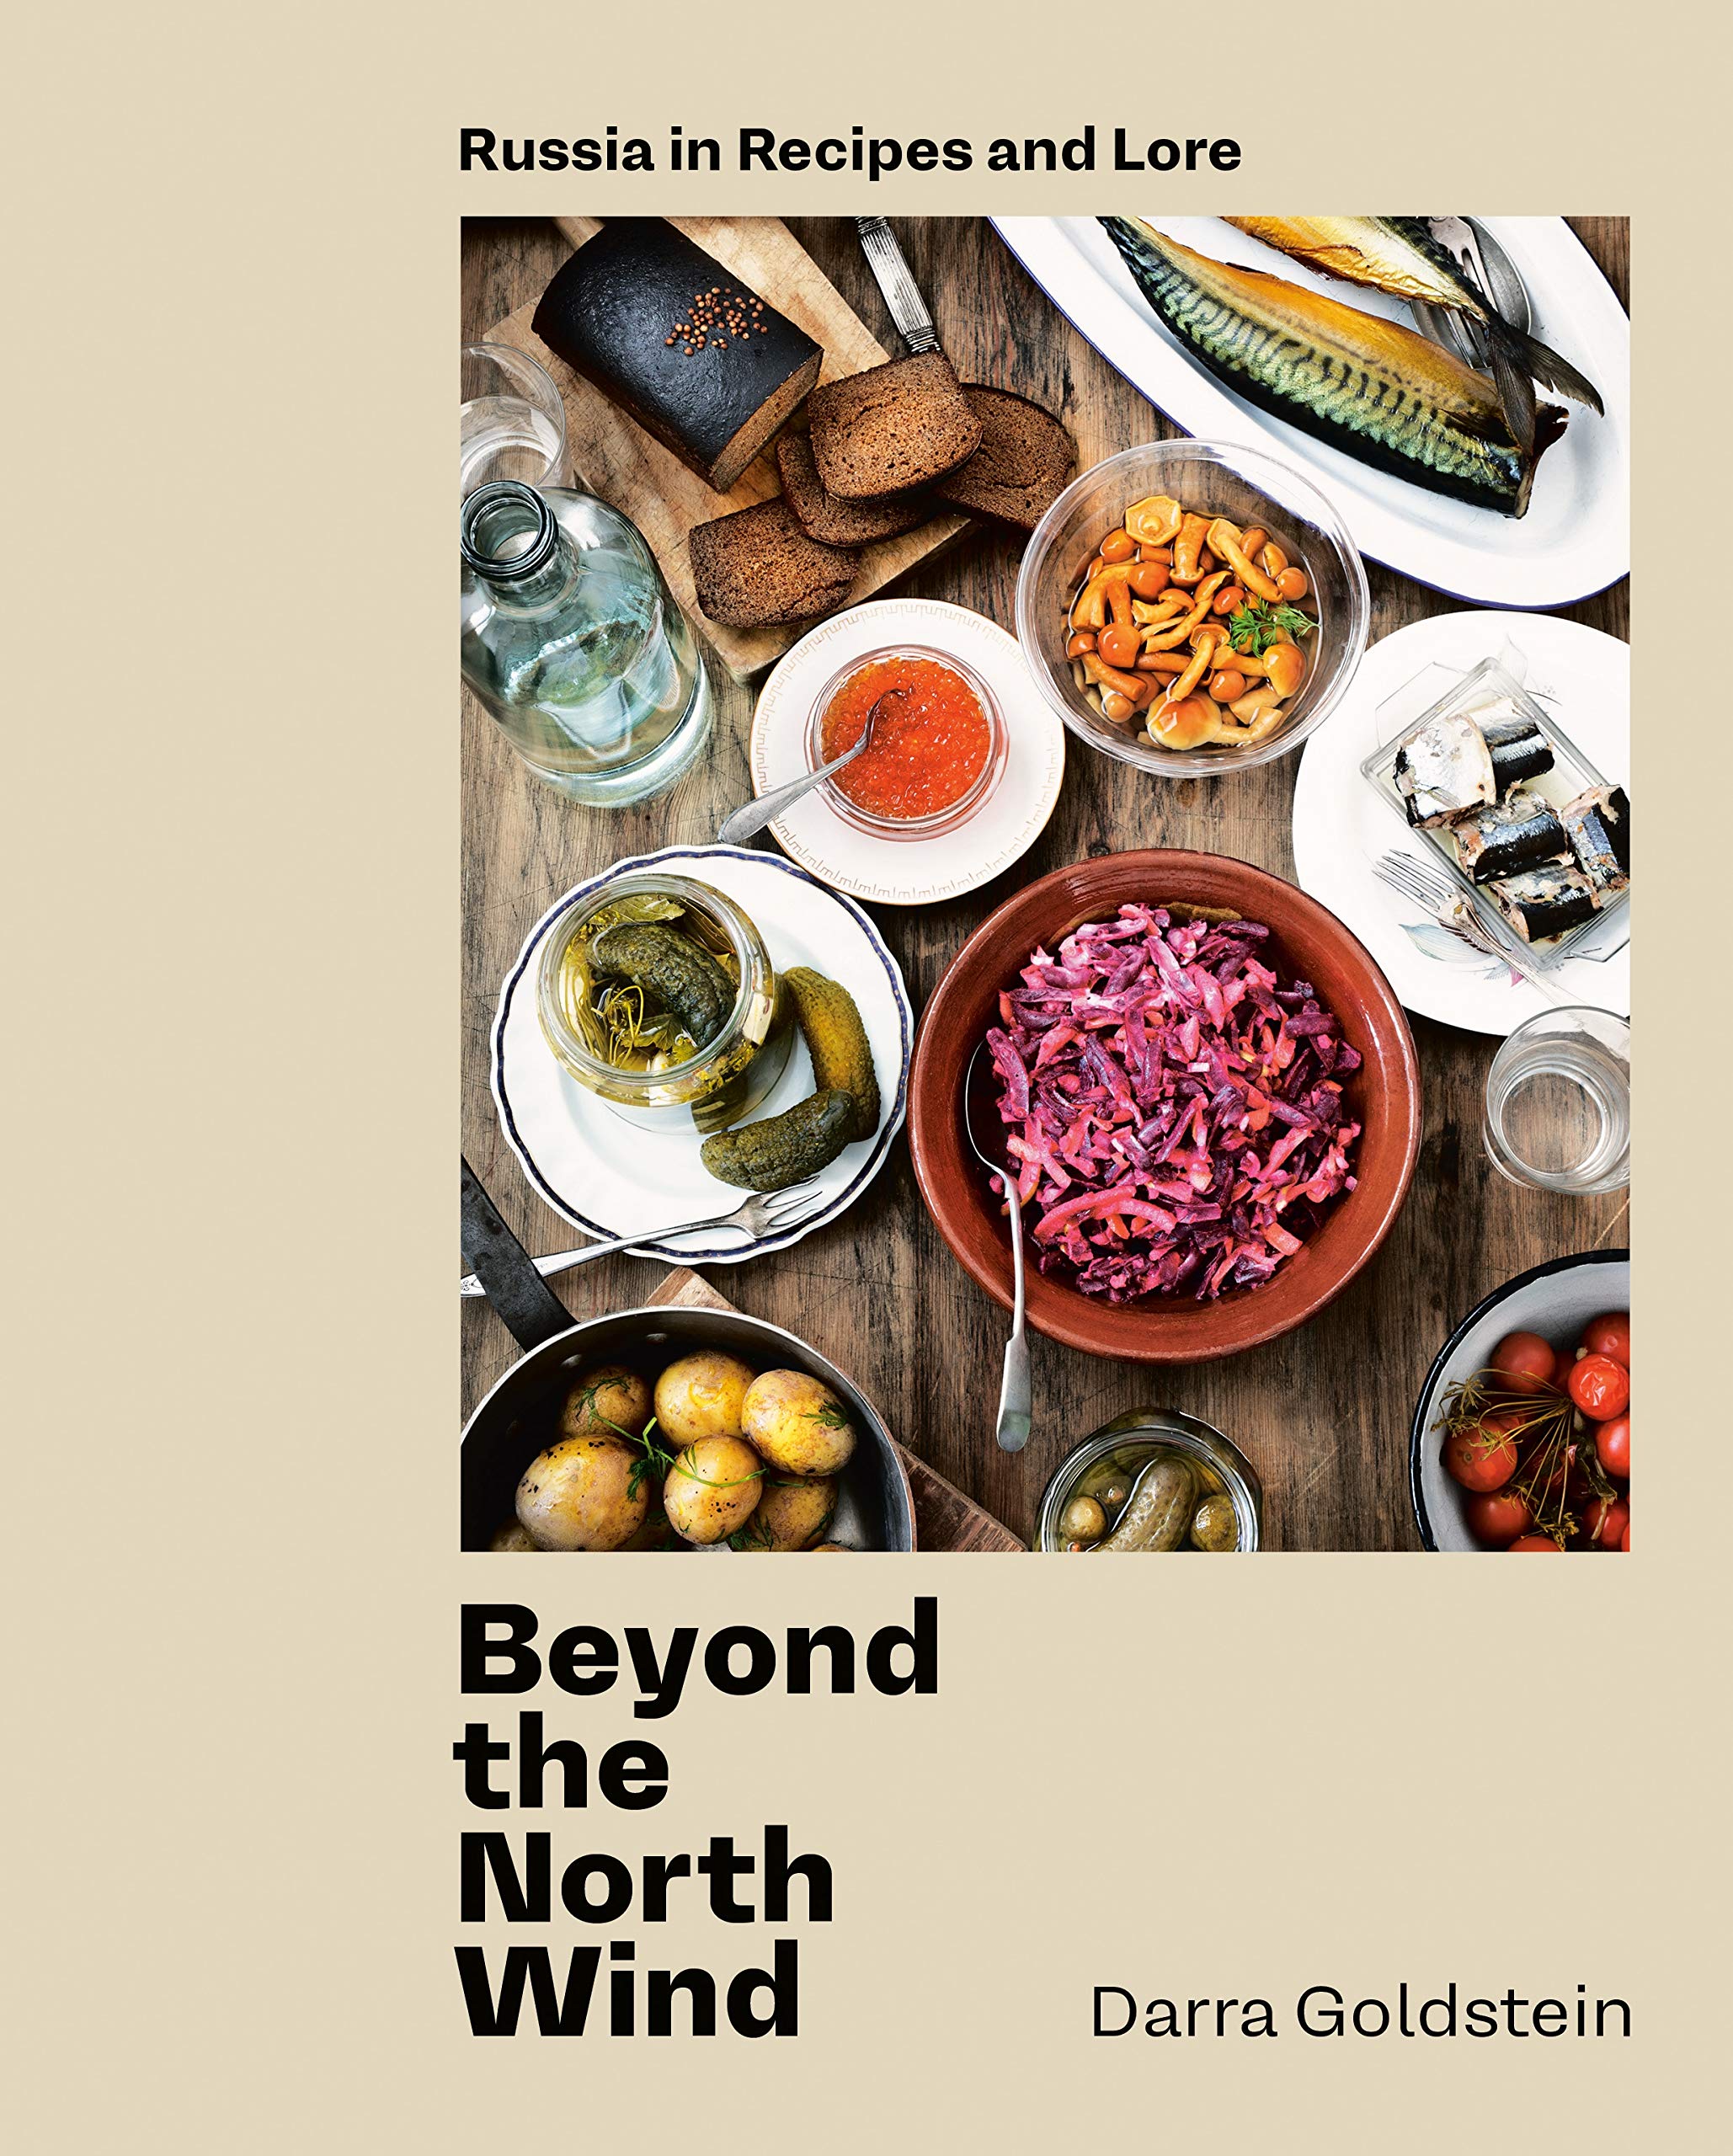 Beyond the North Wind: Russia in Recipes and Lore (Darra Goldstein) *Signed*